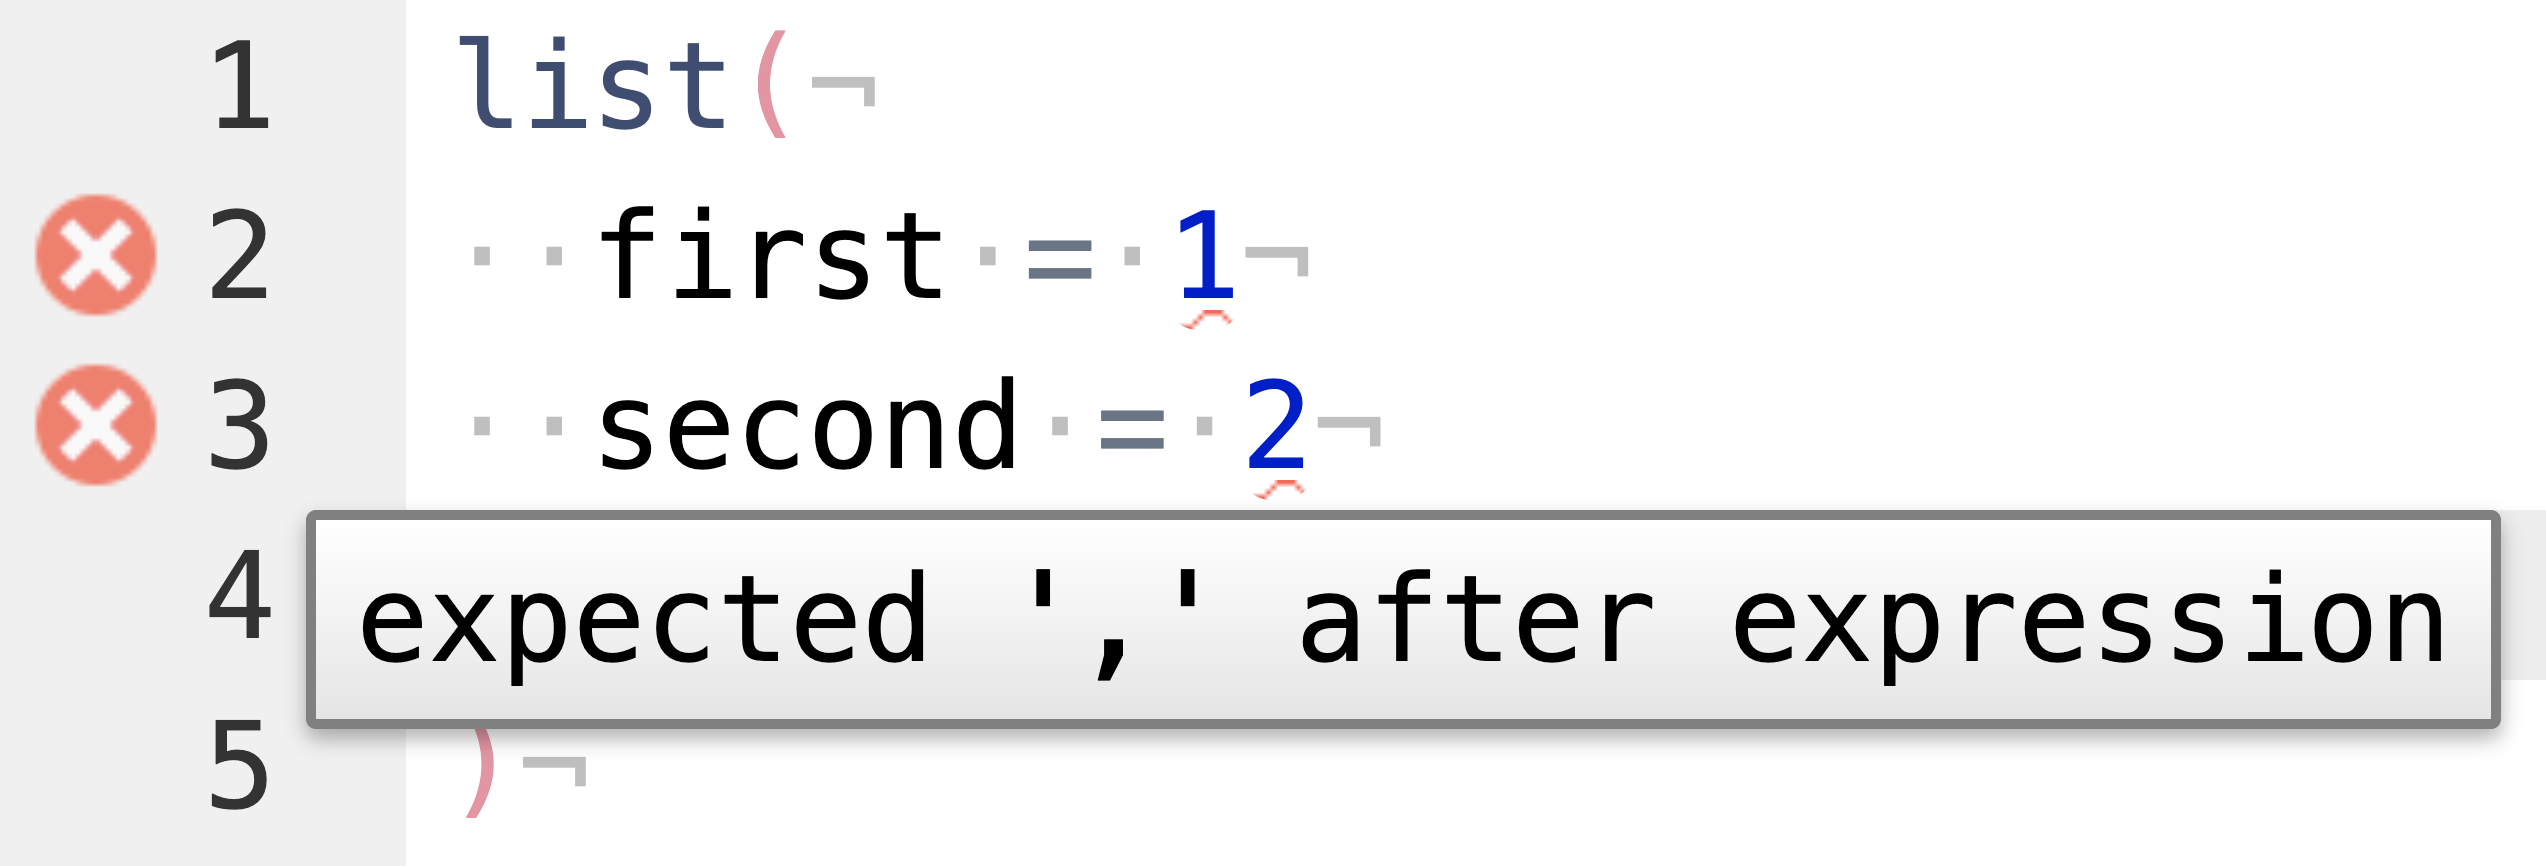 A screenshot of R code missing commas after each line, which returns an error 'exepcted , after expression'